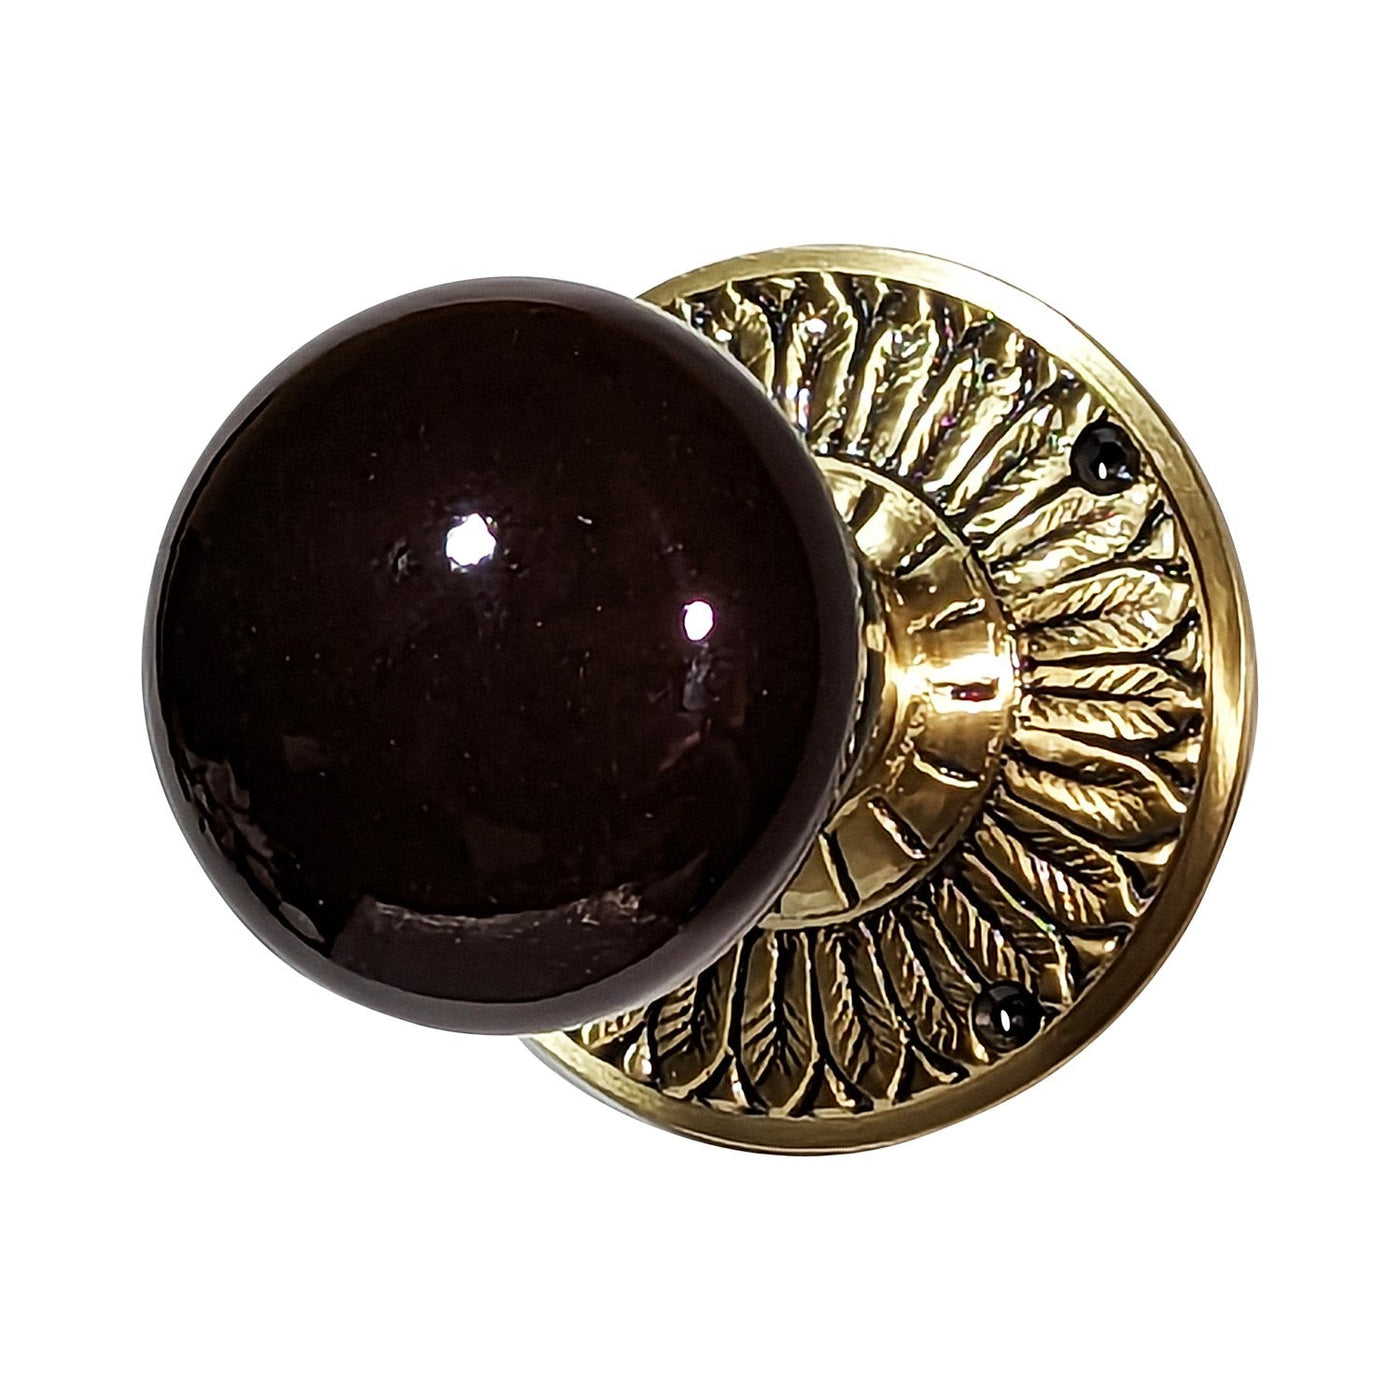 Brown Porcelain Door Knob with Brass Feathers Rosette